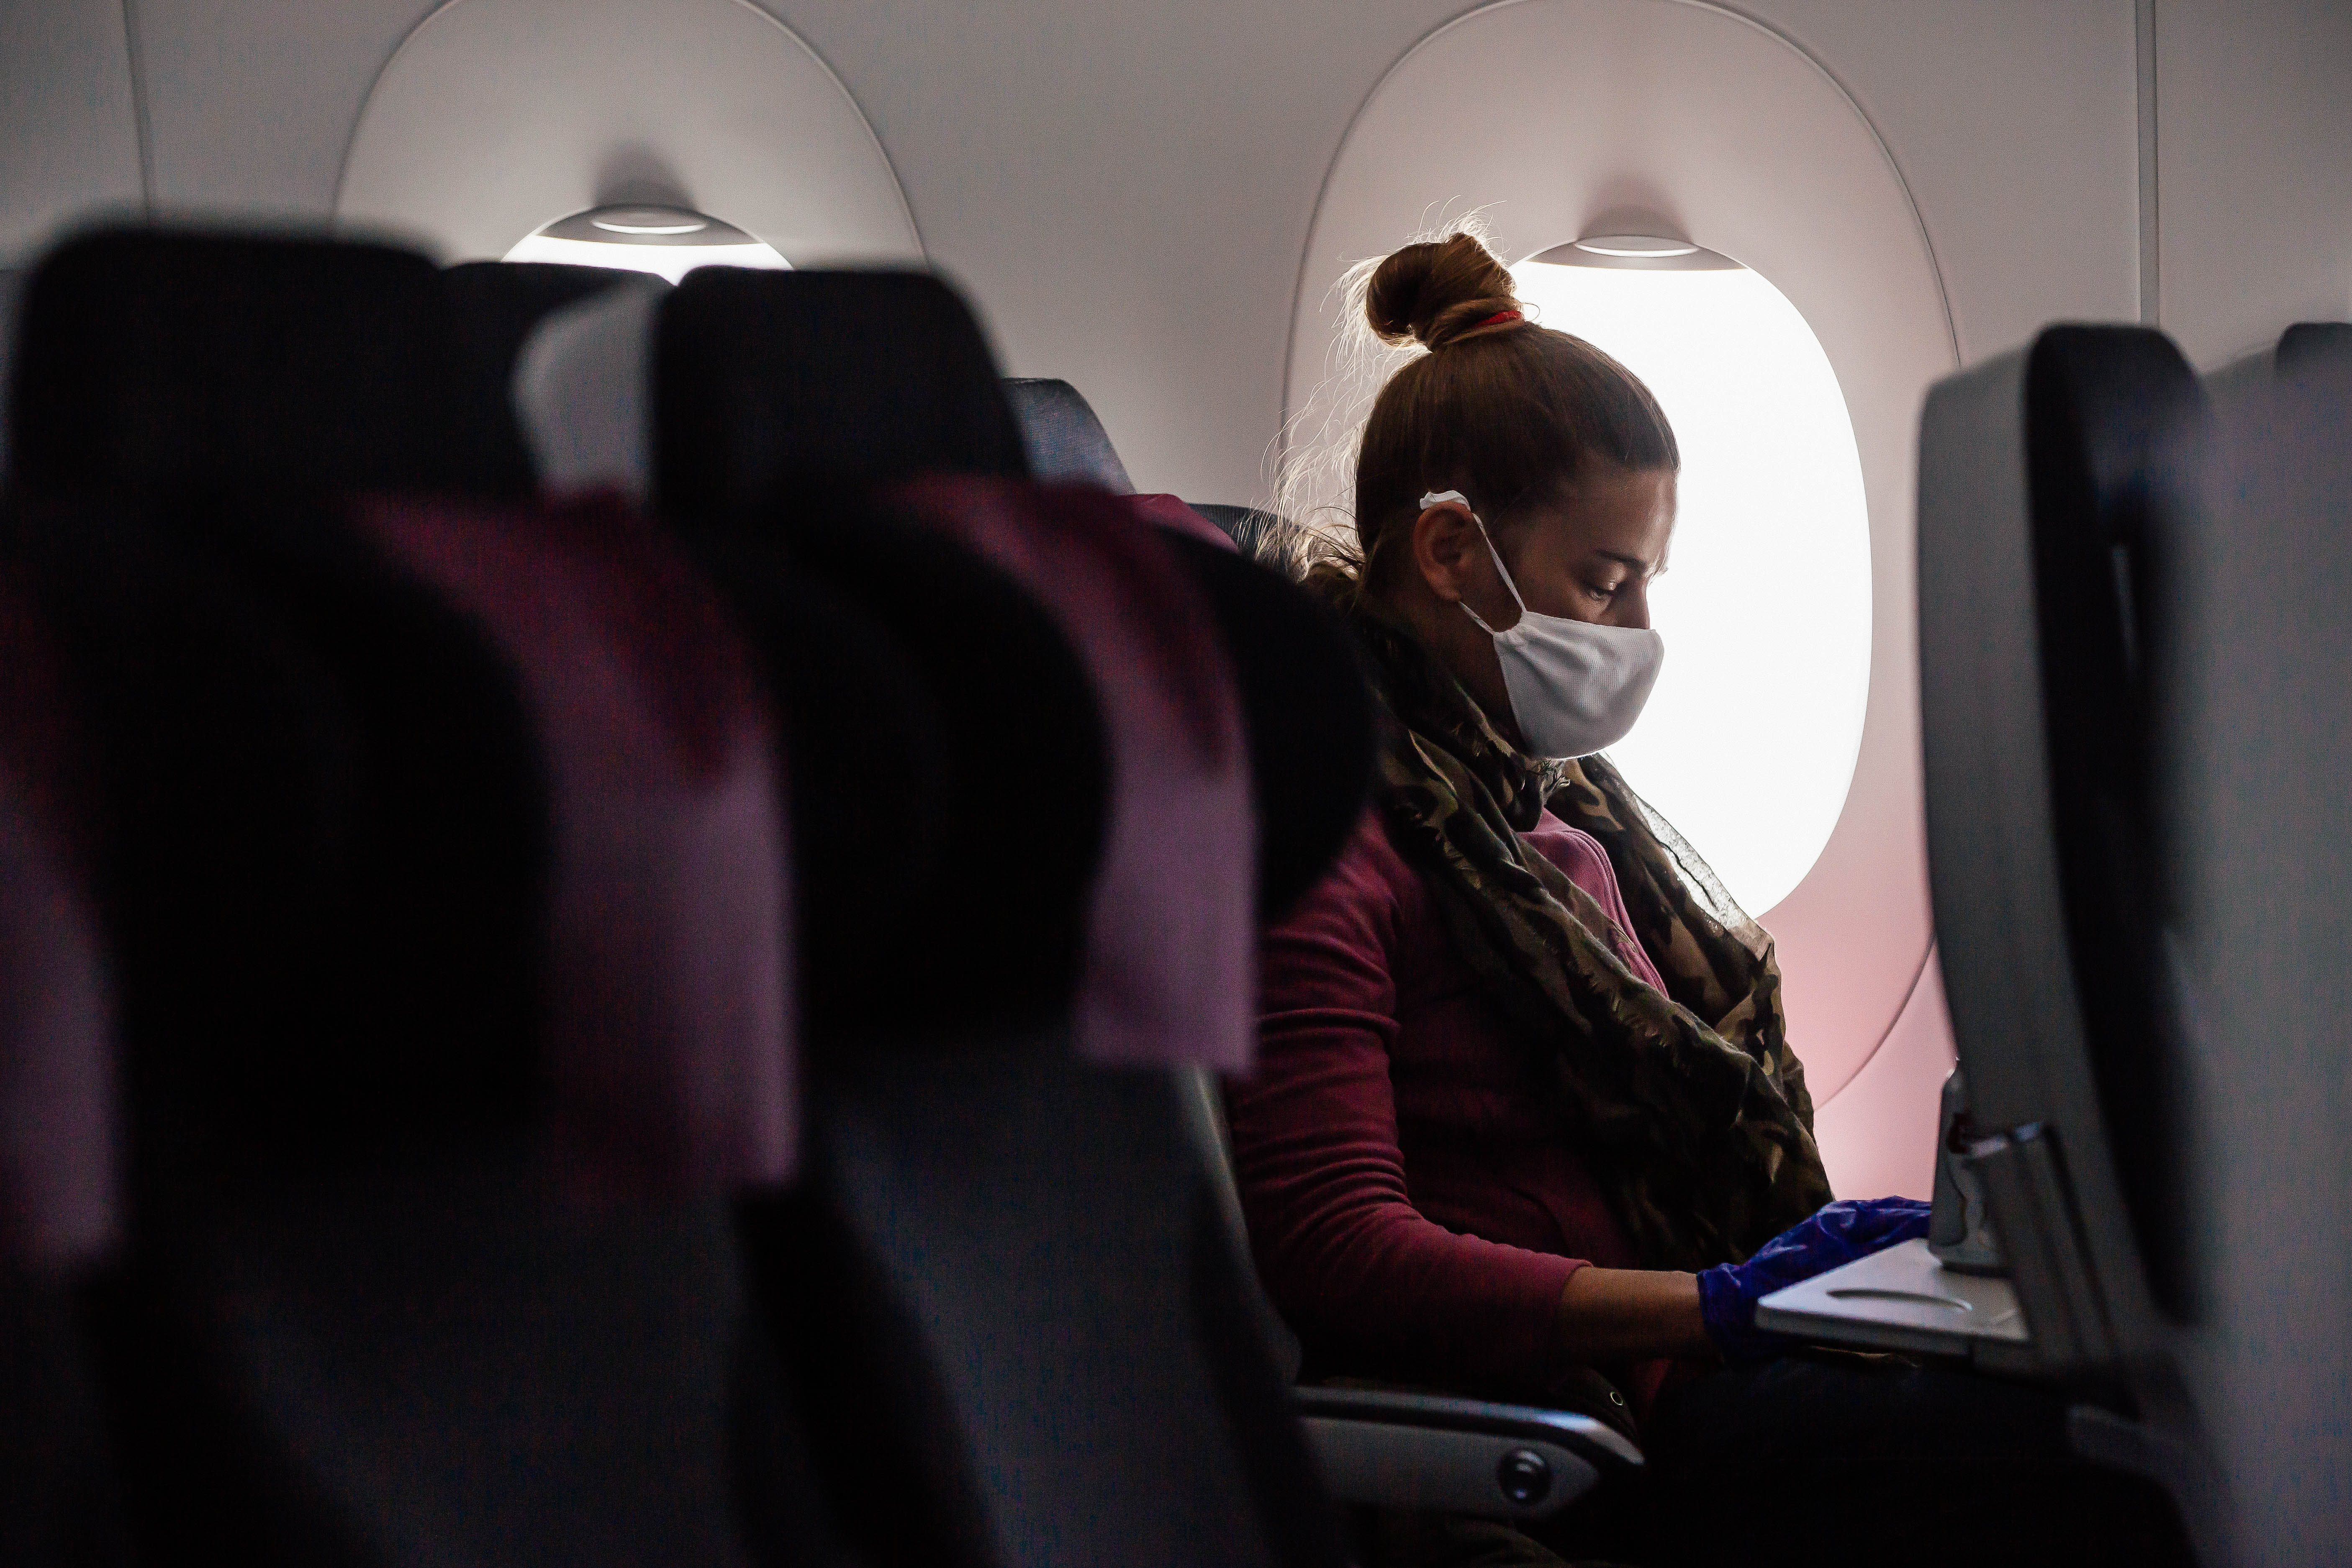 A woman wearing a mask sits on an airplane next to two empty seats.